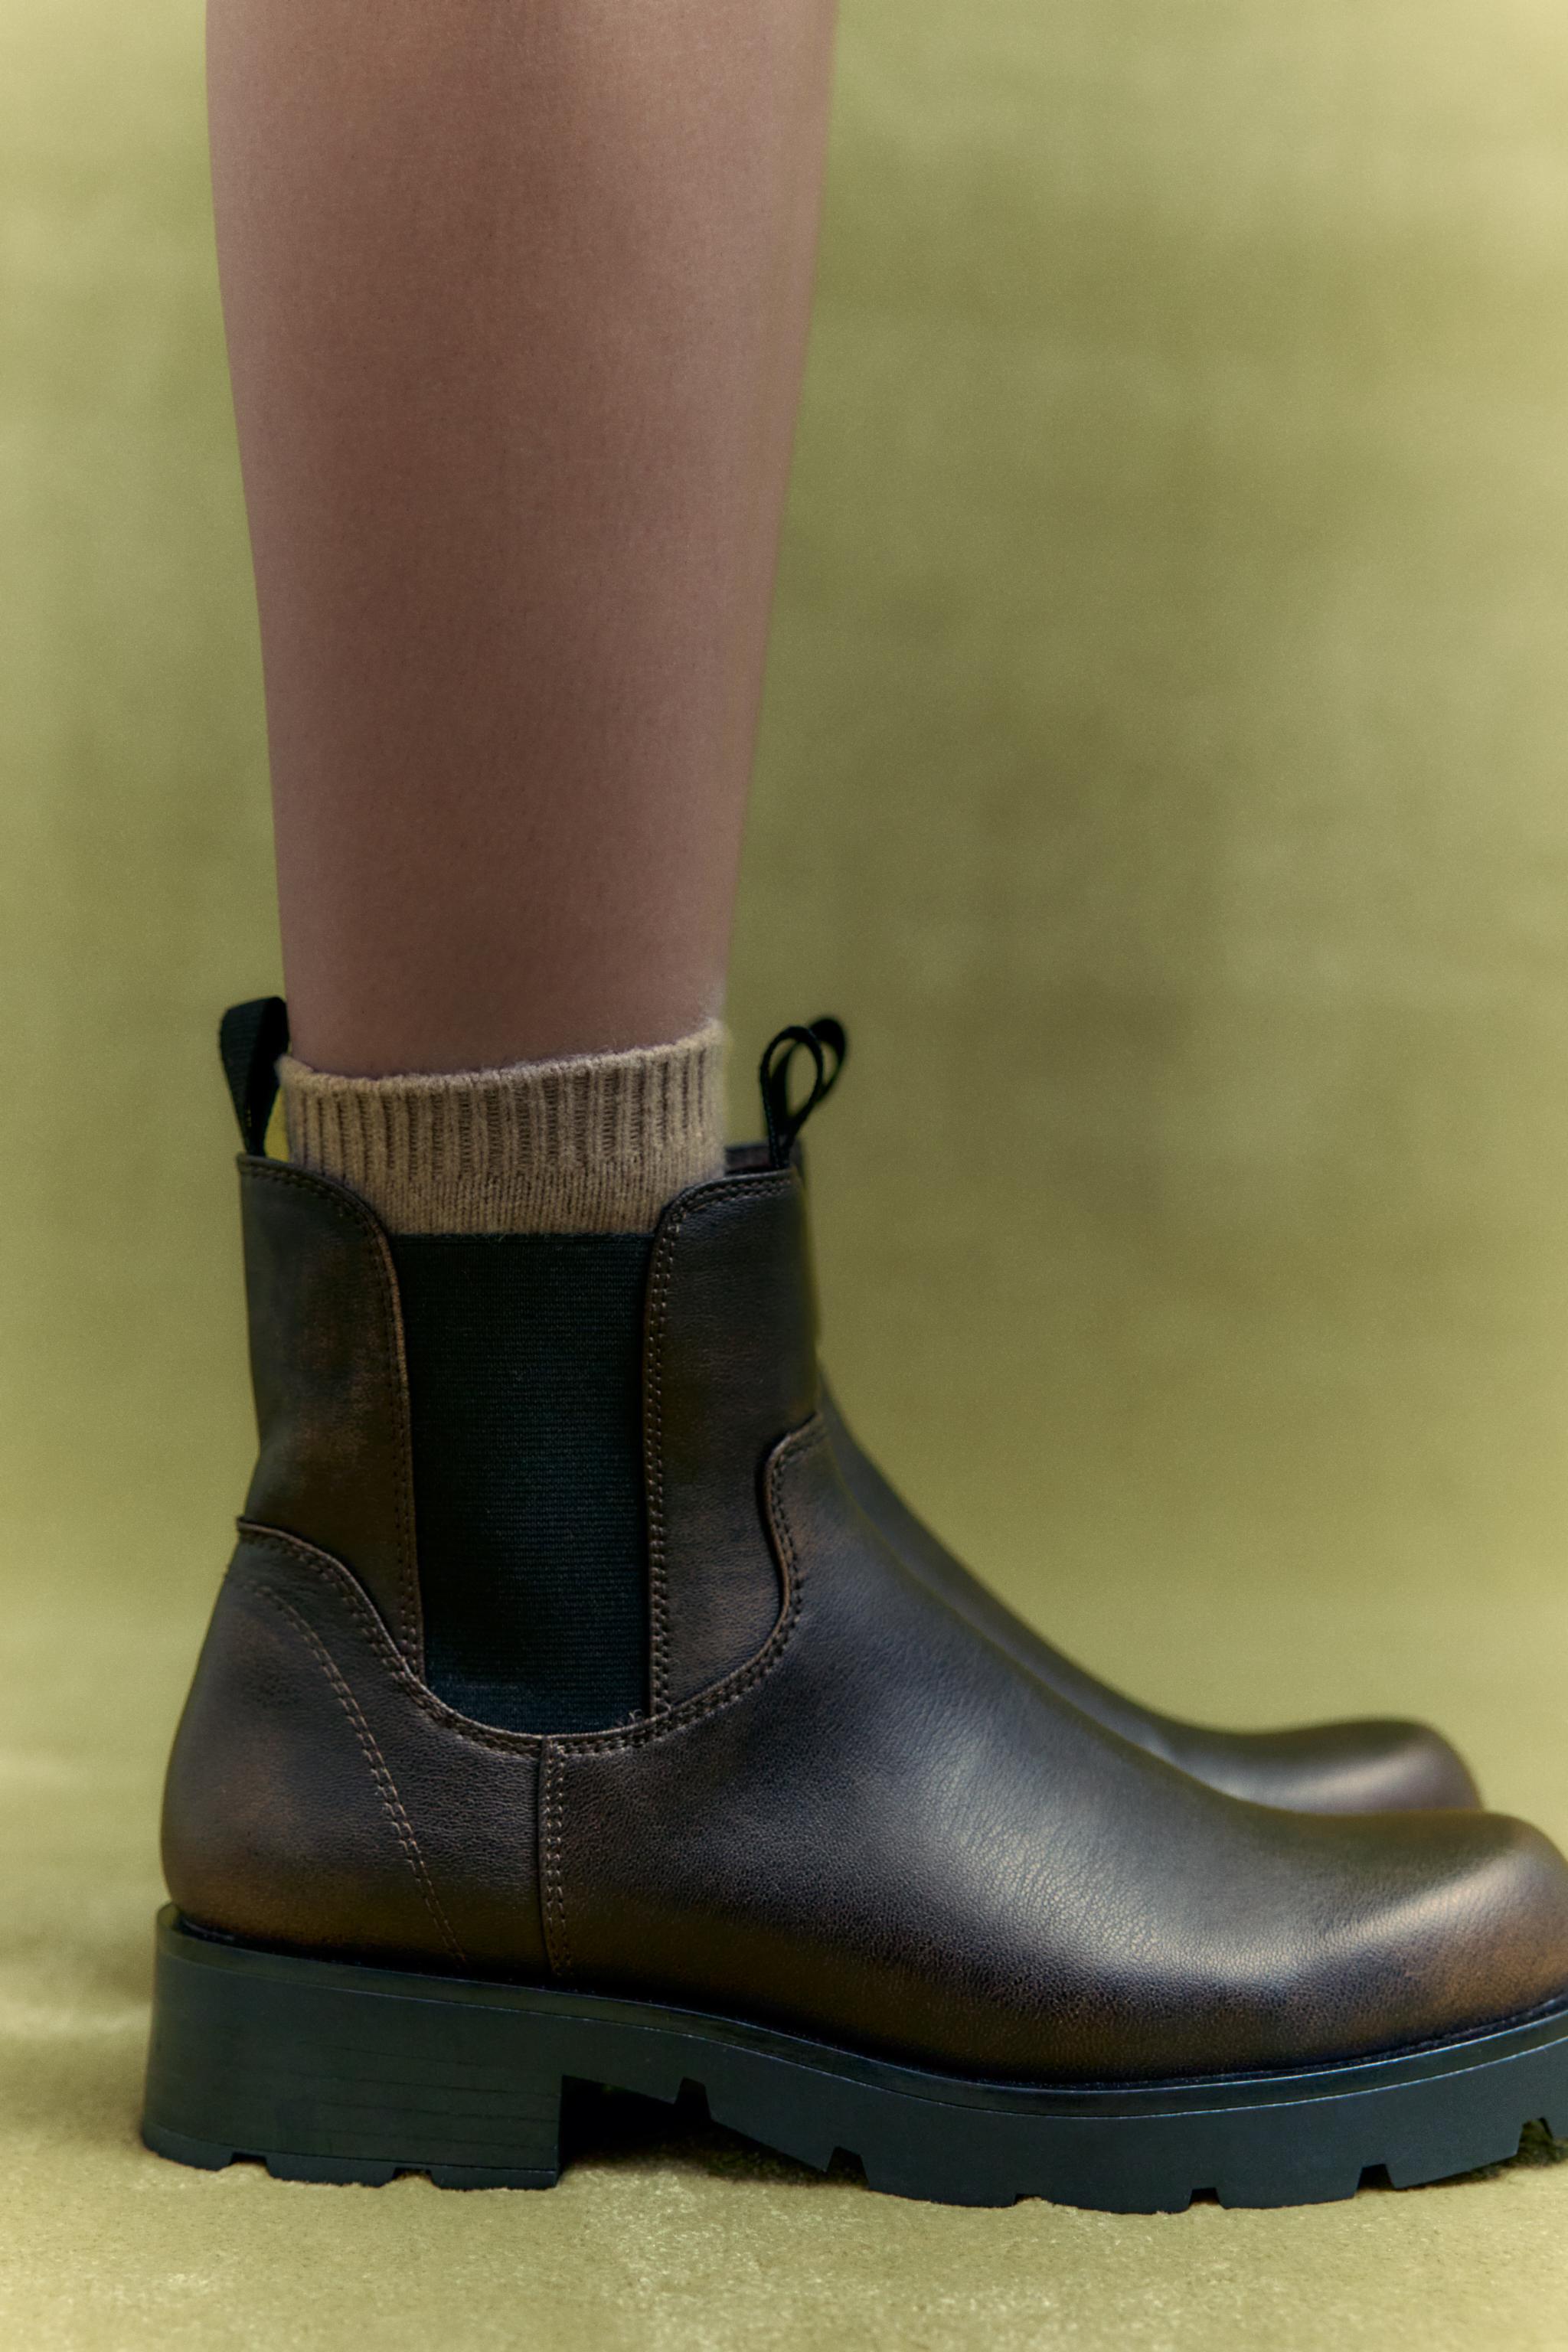 CHELSEA BOOTS - Brown | ZARA United States